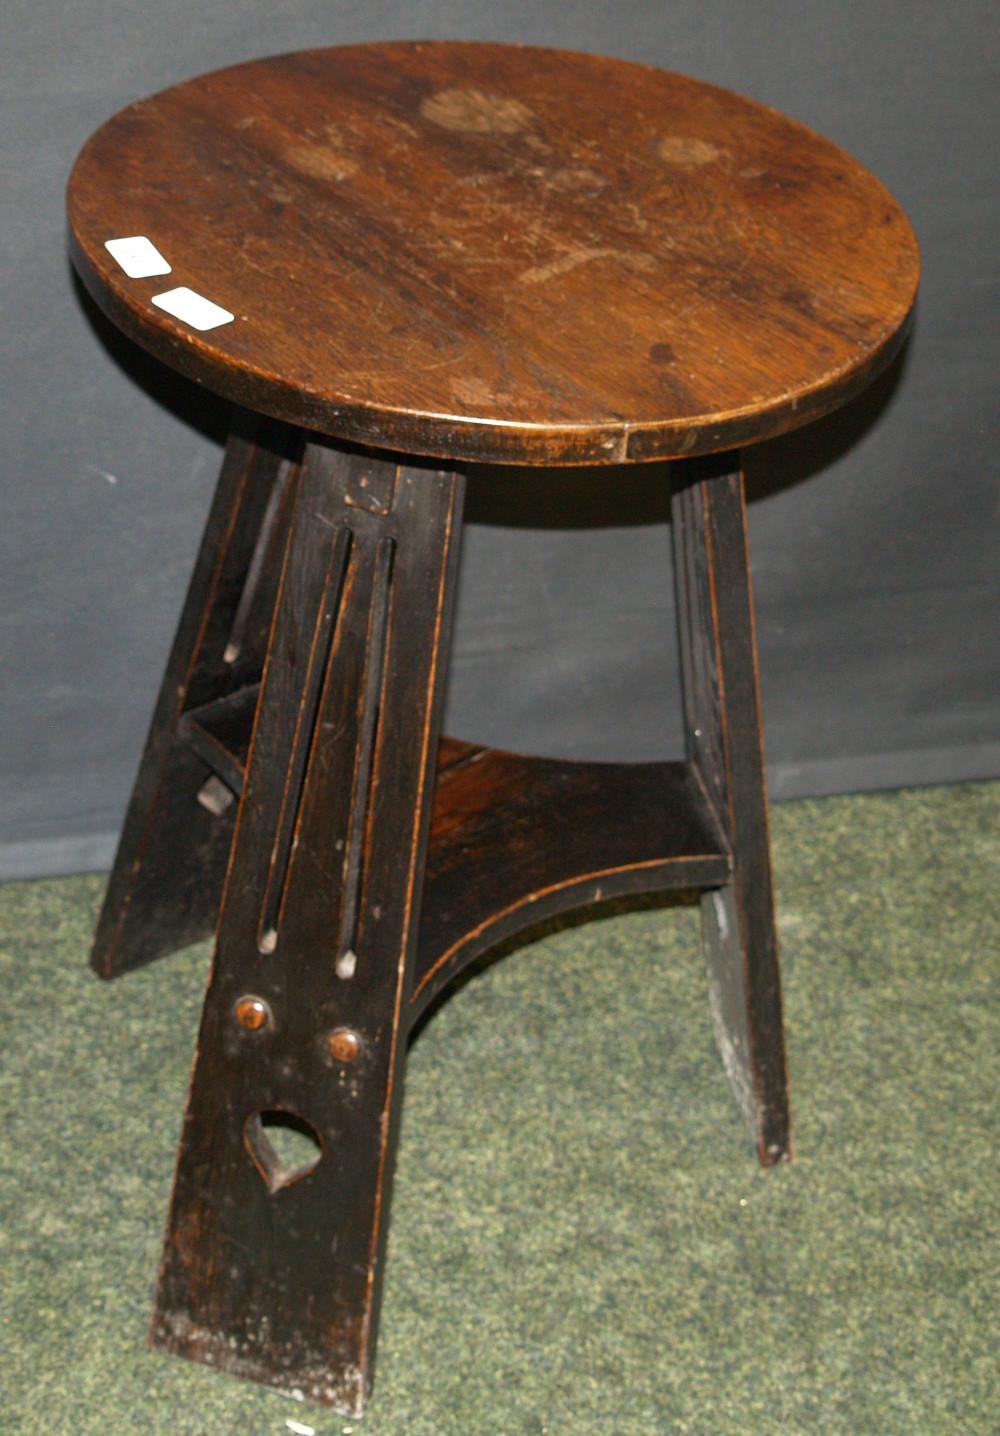 Late 19th century oak Liberty's-style circular occasional table